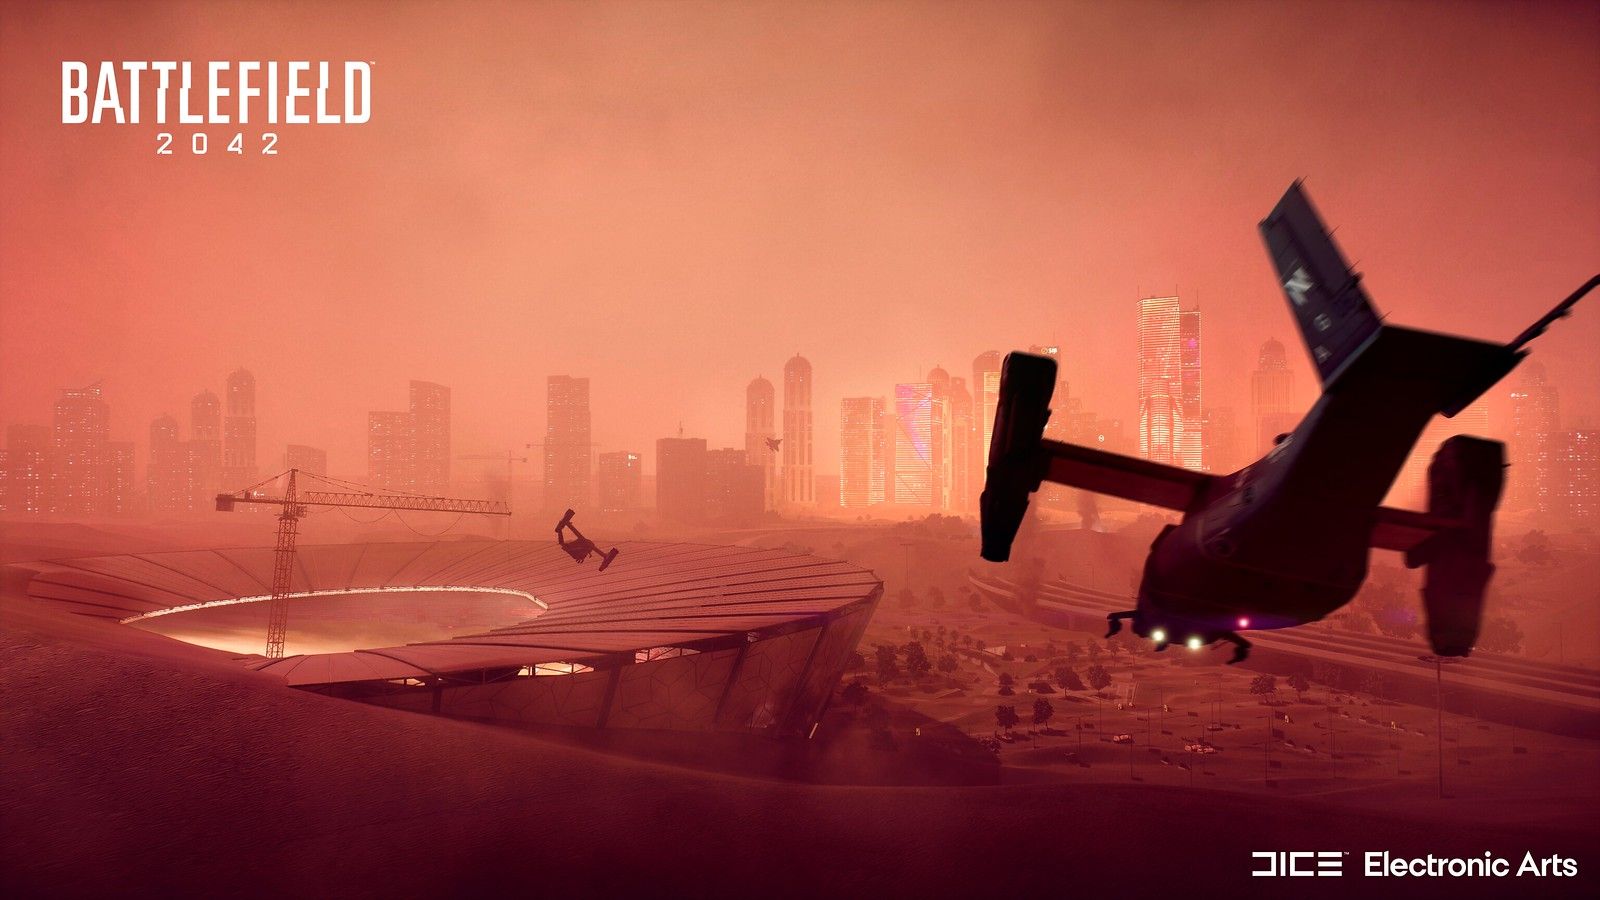 Battlefield 2042 launches October 22 on PS4 and PS5: first details – PlayStation.Blog